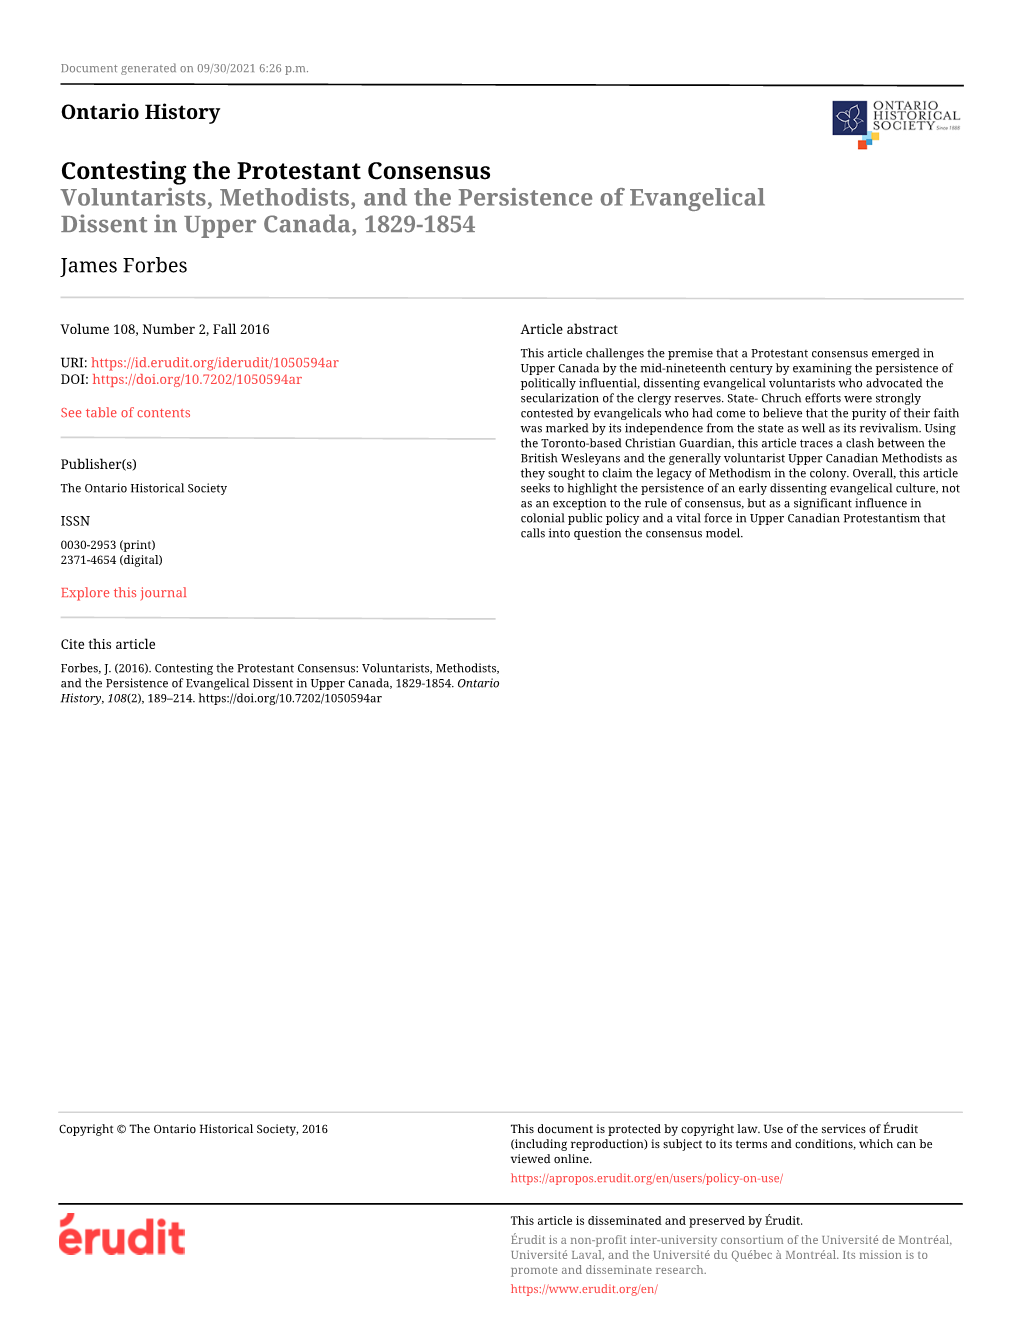 Contesting the Protestant Consensus: Voluntarists, Methodists, and the Persistence of Evangelical Dissent in Upper Canada, 1829-1854